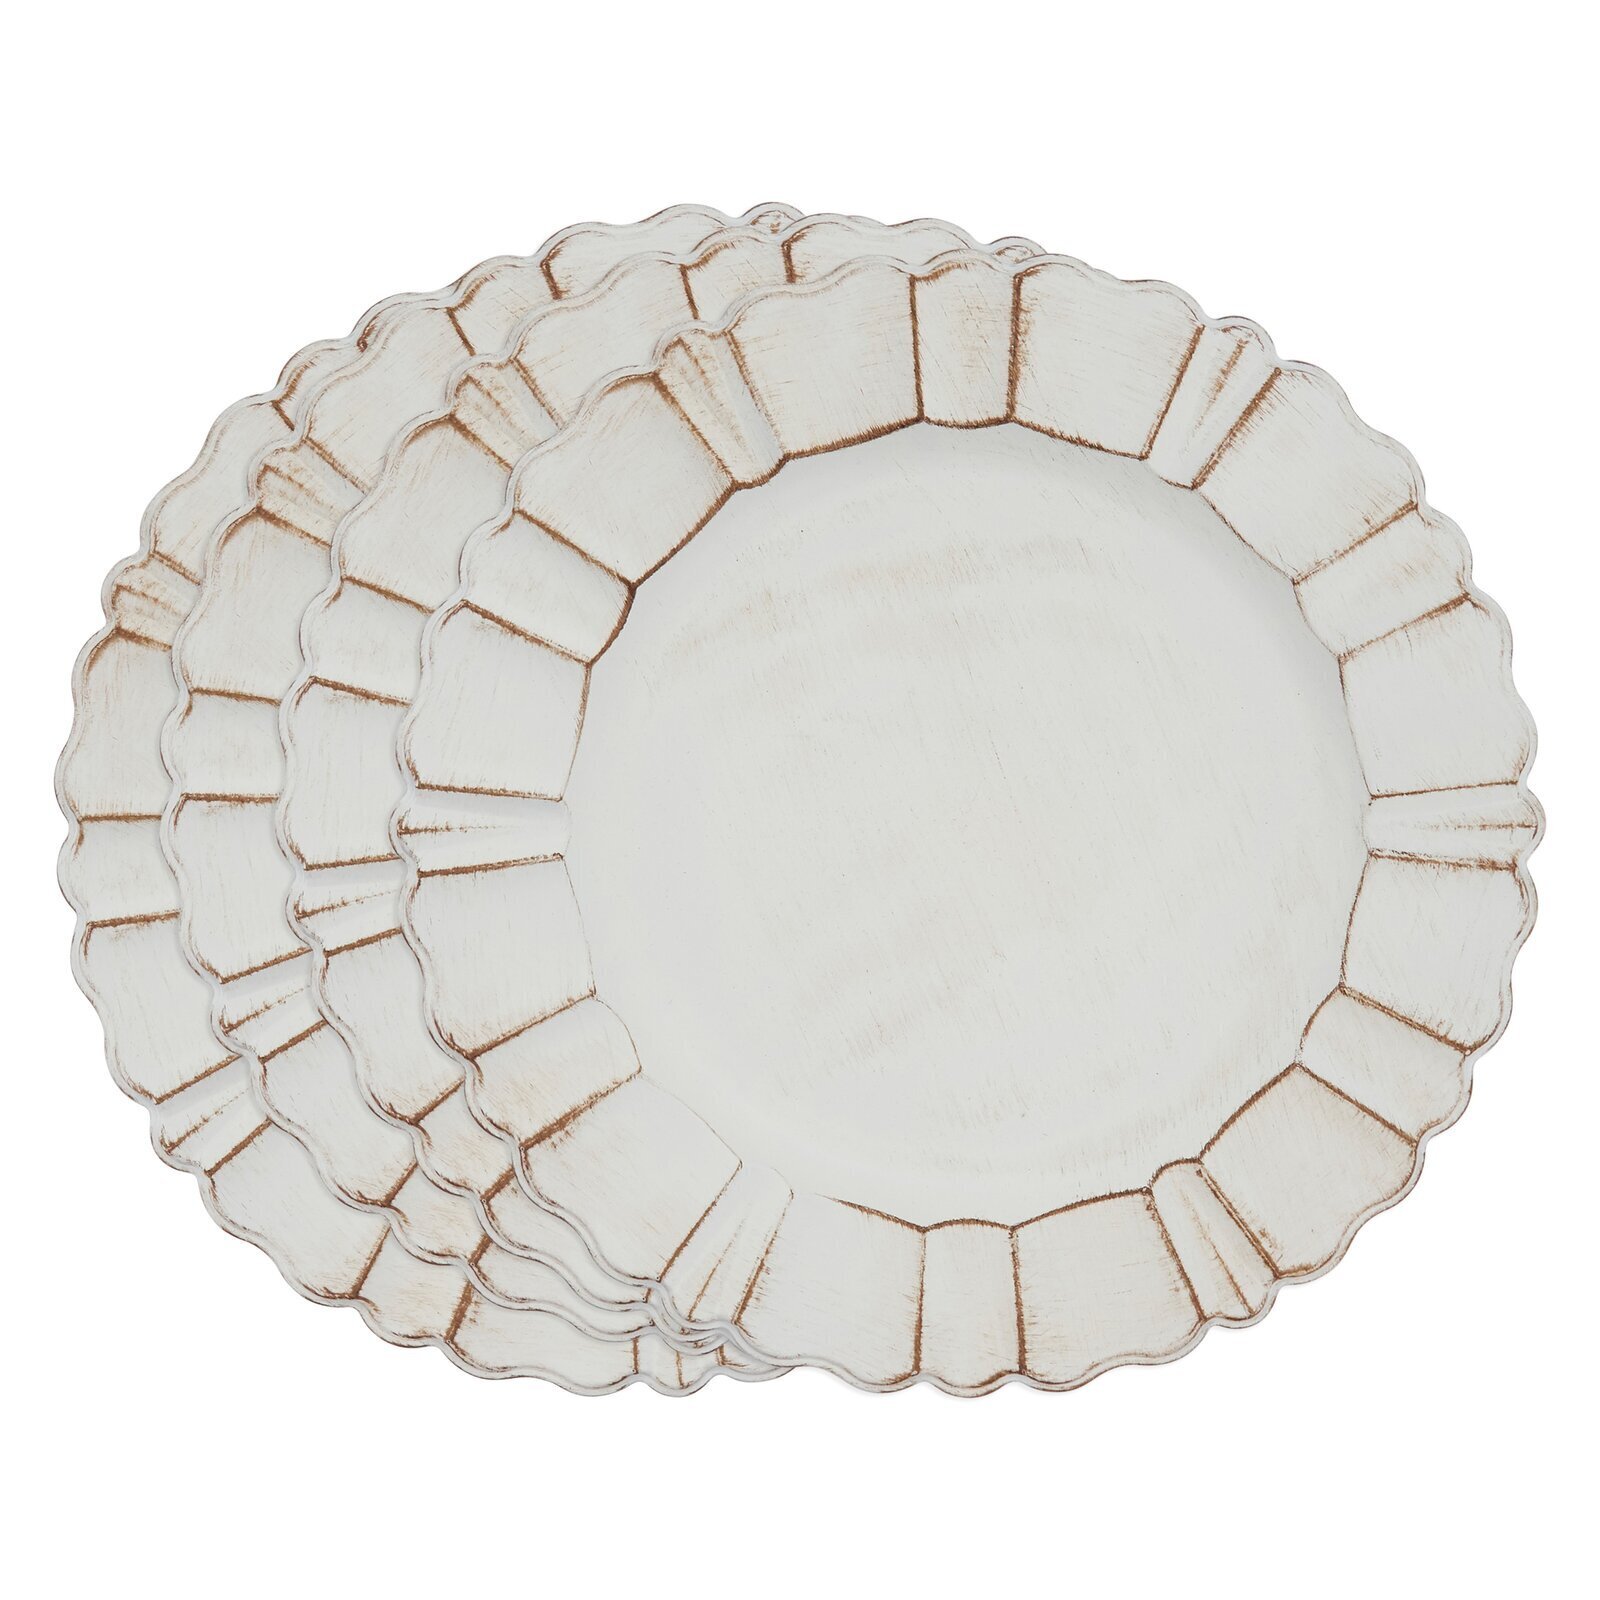 Scalloped Ruffled Charger Plates